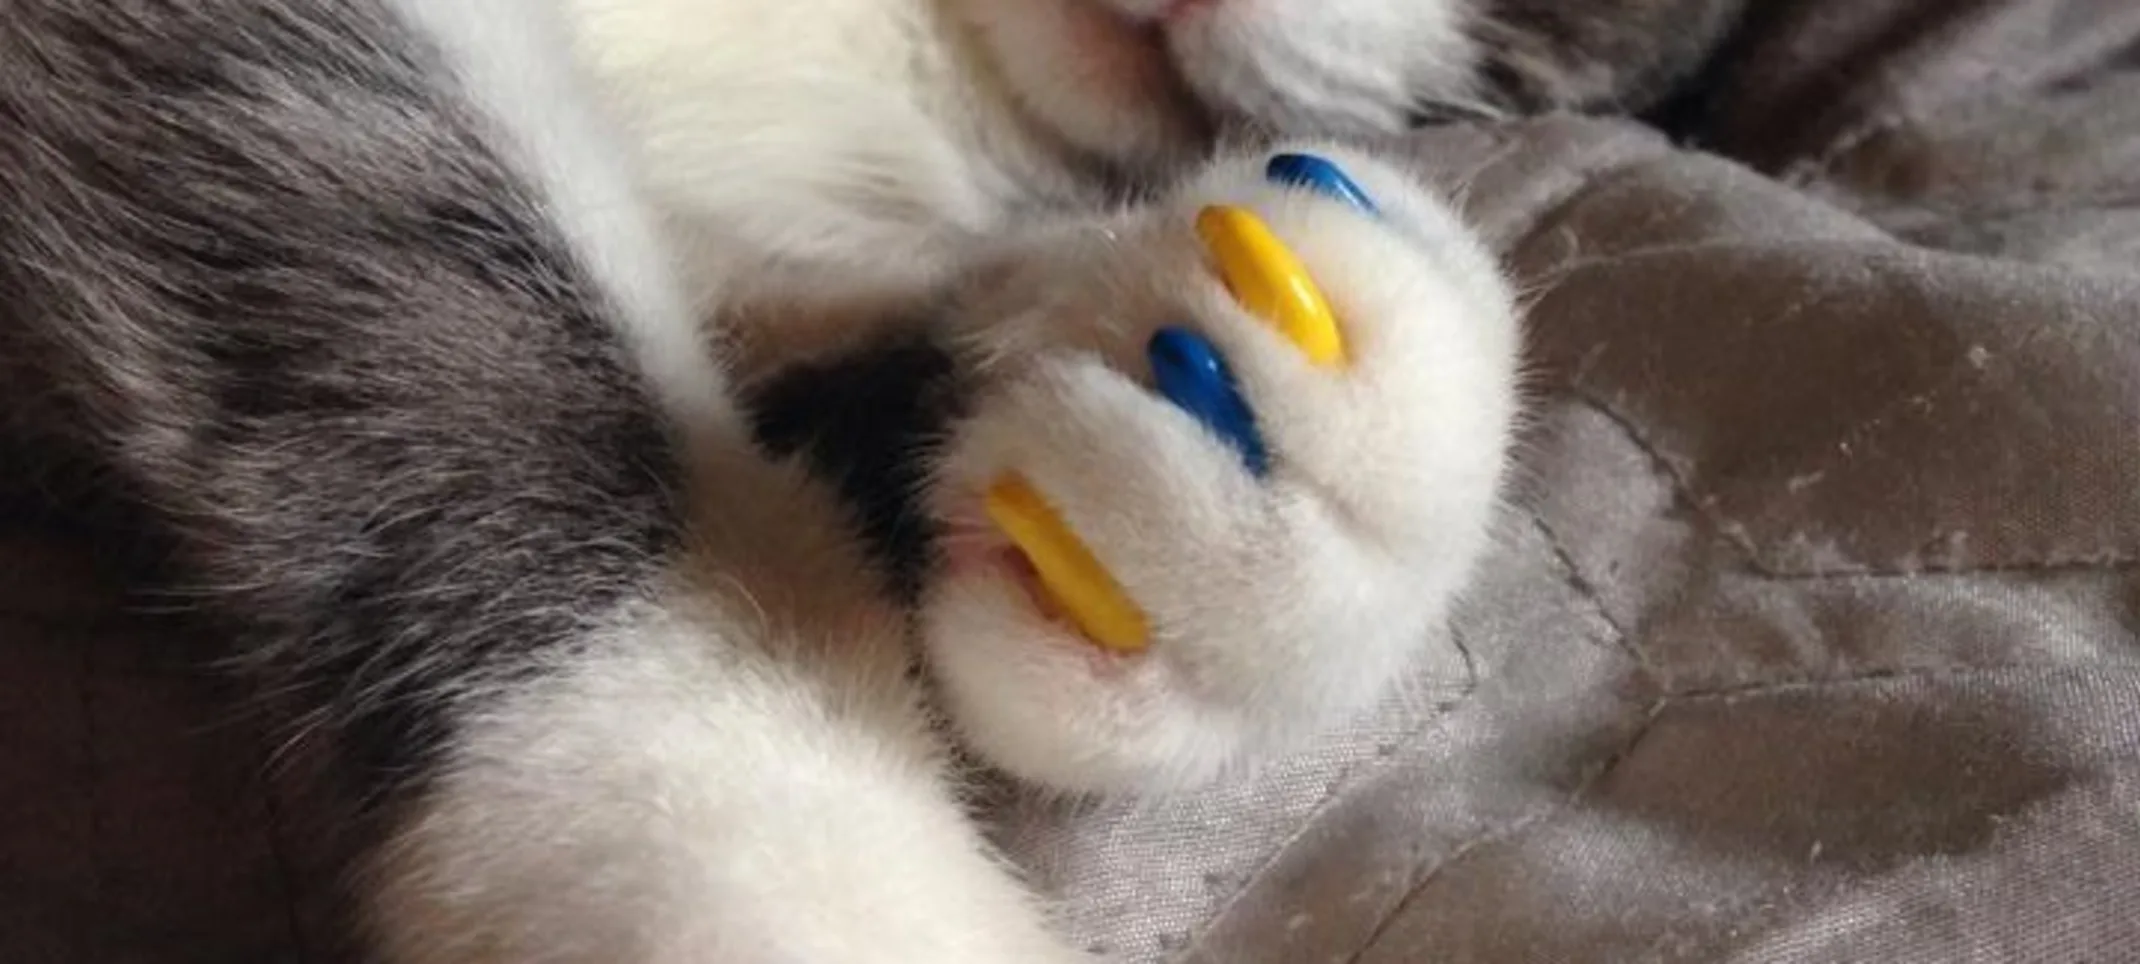 a cat wearing yellow and blue soft claws on their front paws